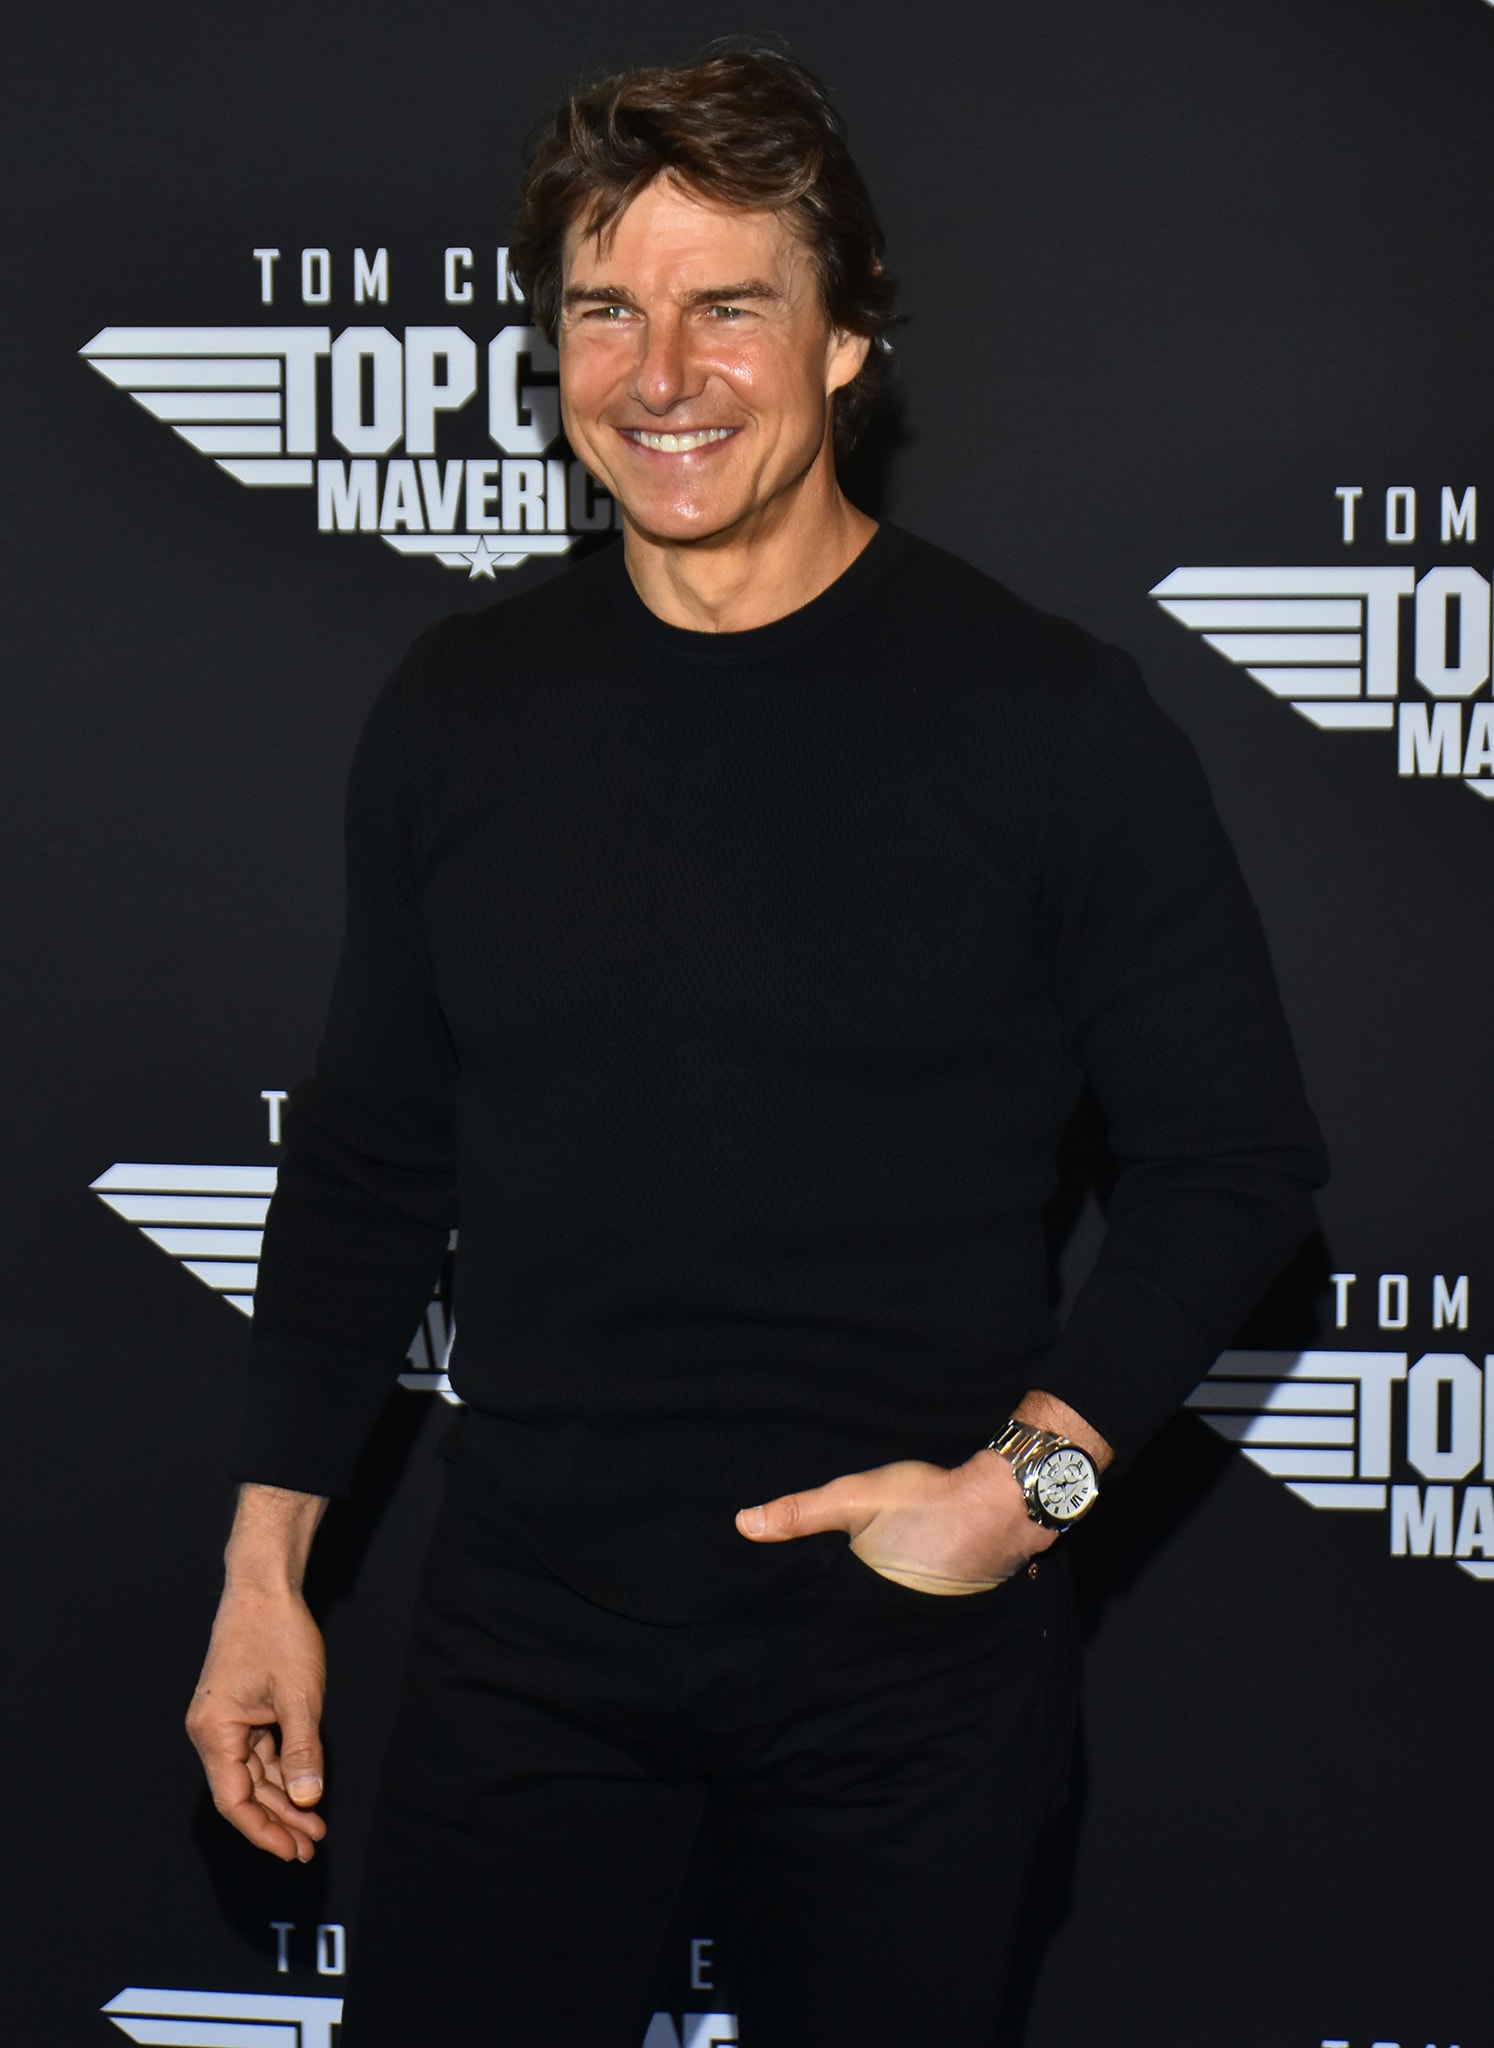 Tom Cruise has amassed a whopping $600 net worth from his actor and producer credits on blockbuster movies